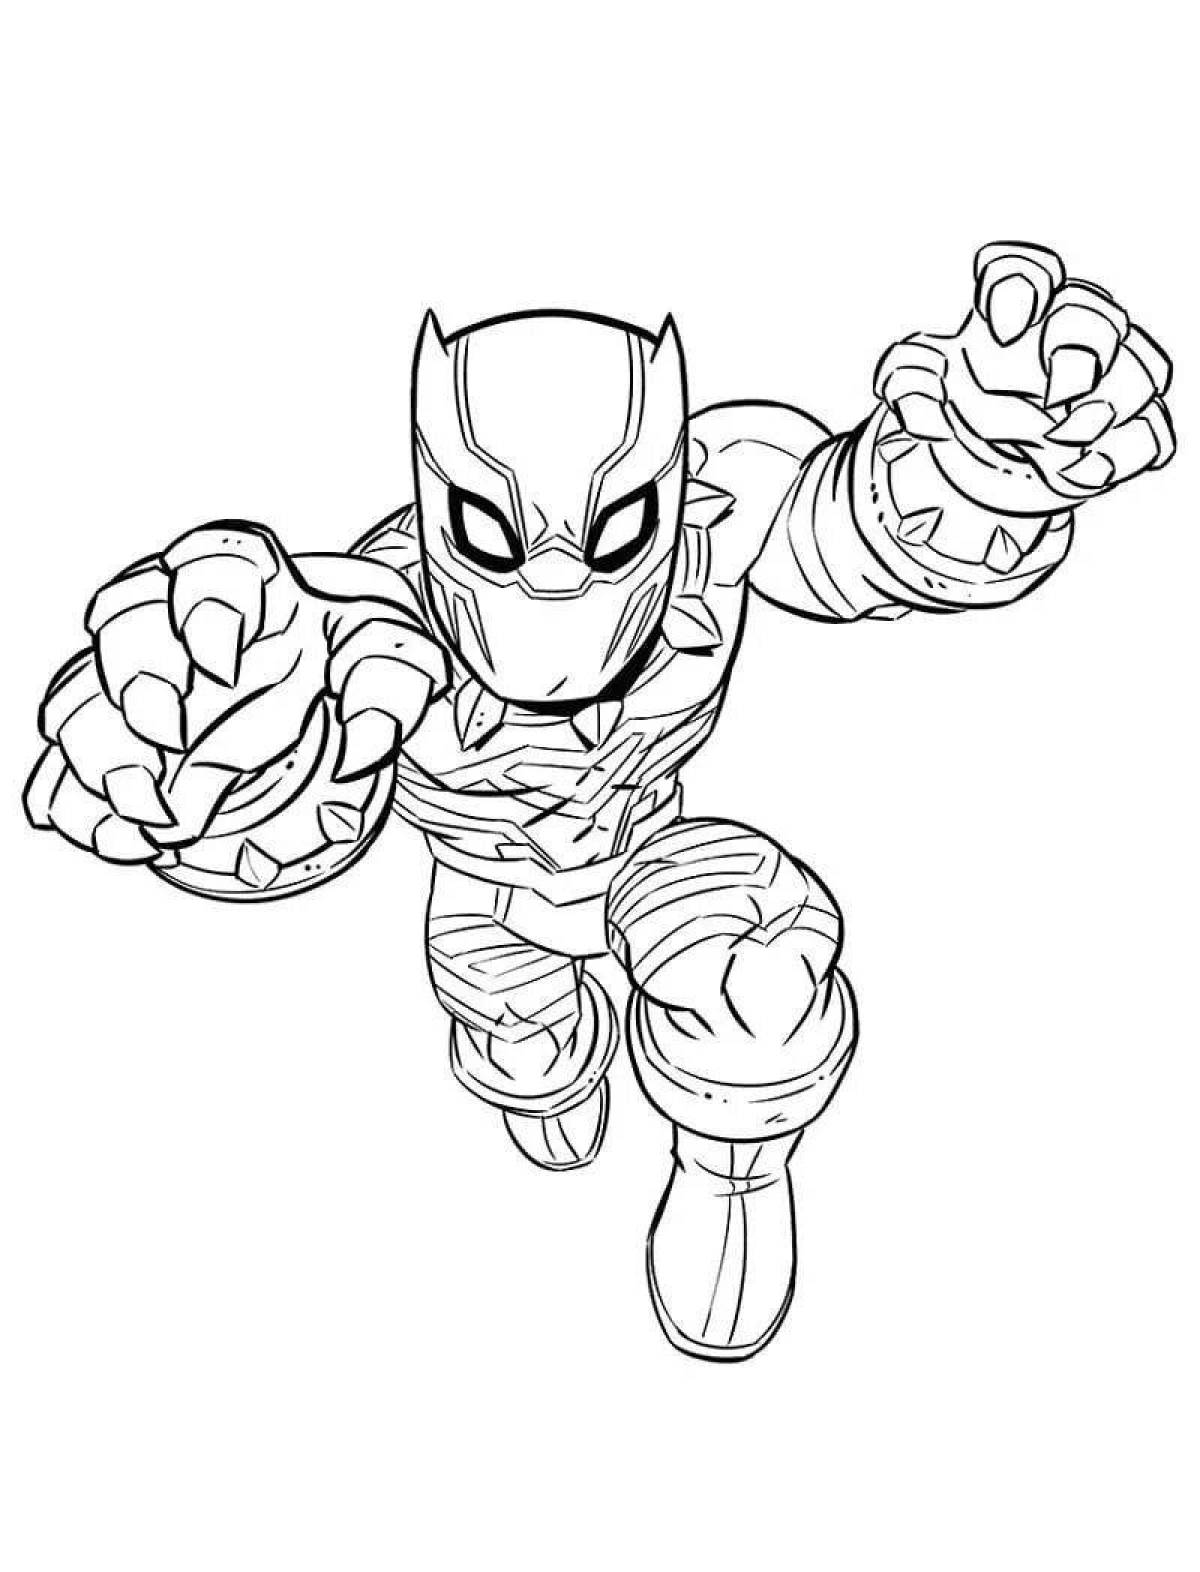 Marvel dazzling panther coloring page